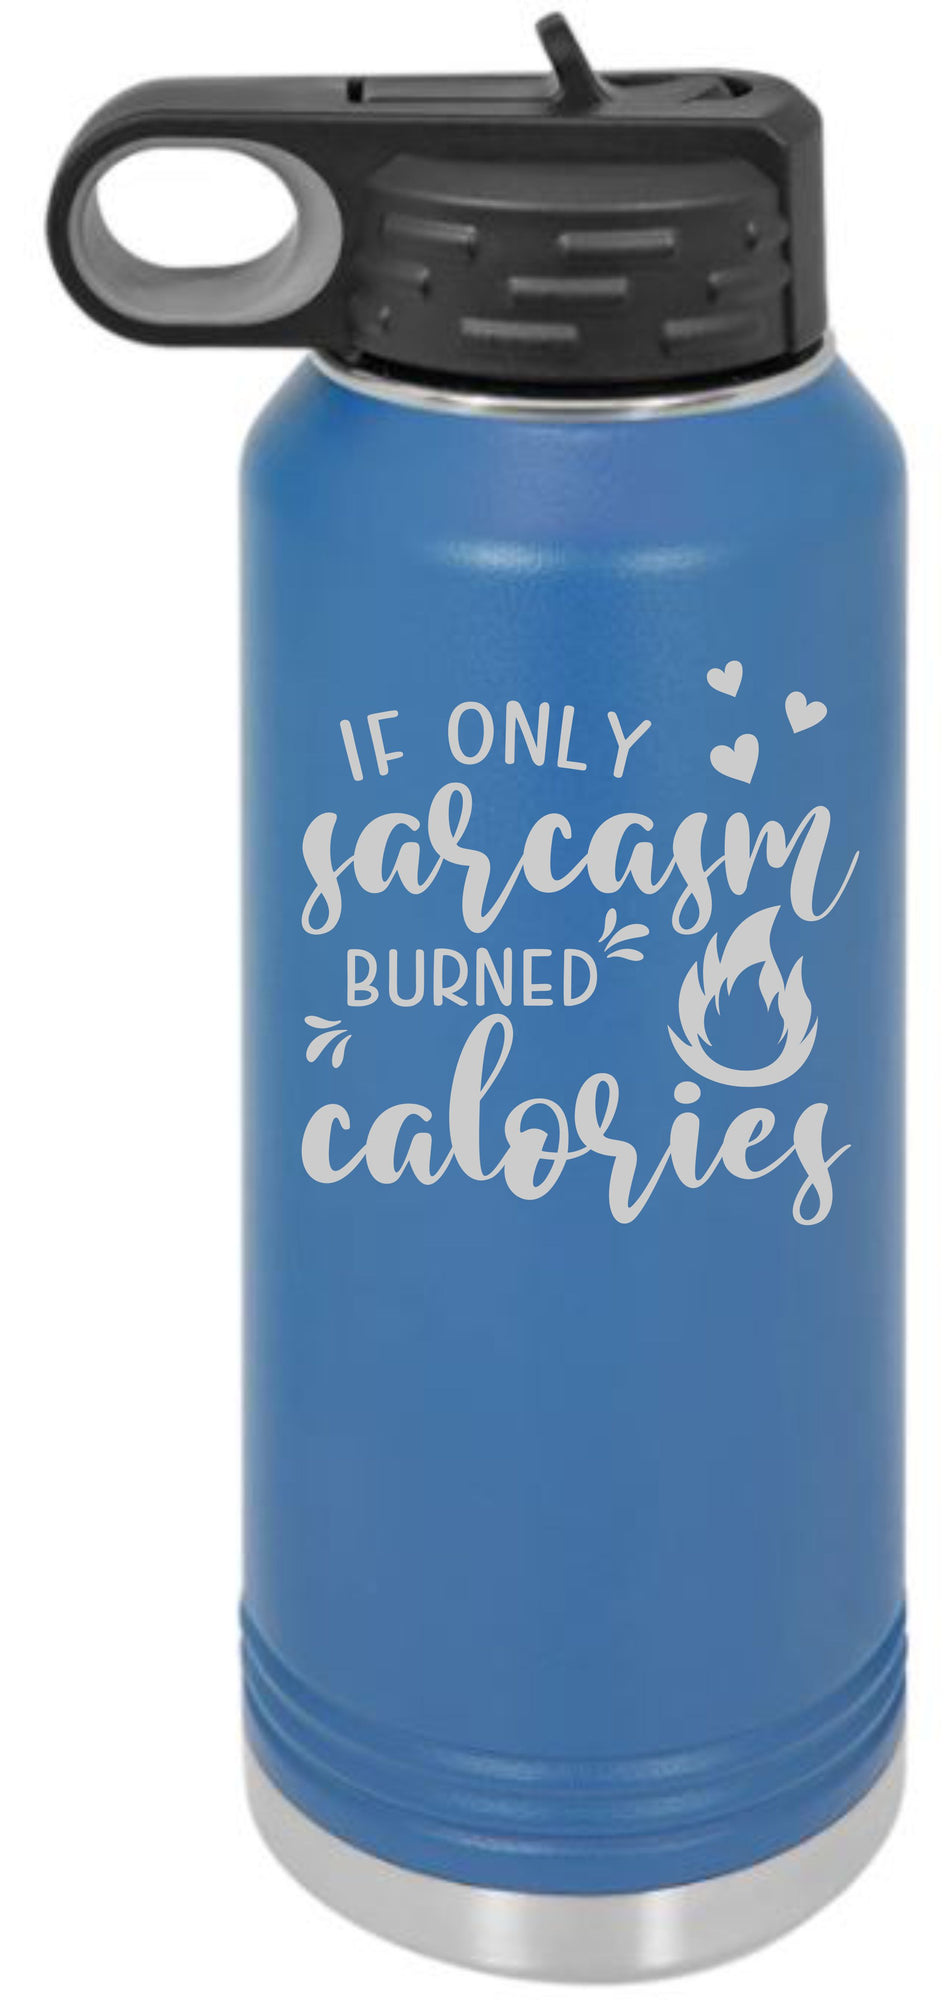 Sarcasm burned calories Engraved 30oz. Water Bottle - Powercall Sirens LLC